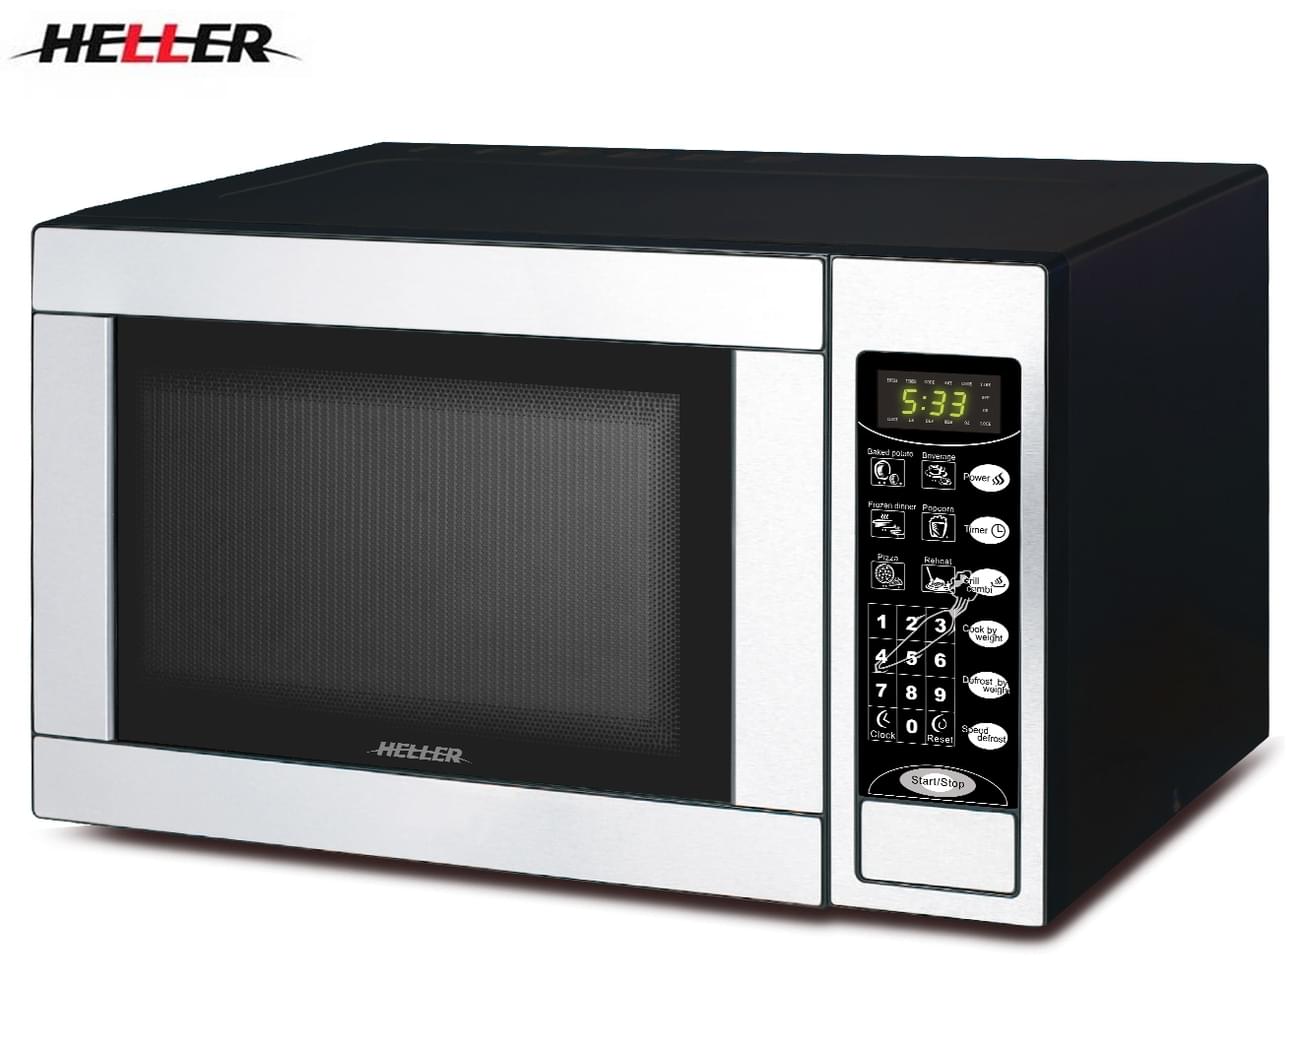 Buy microwaves for less - compact microwaves & more [Home Delivery